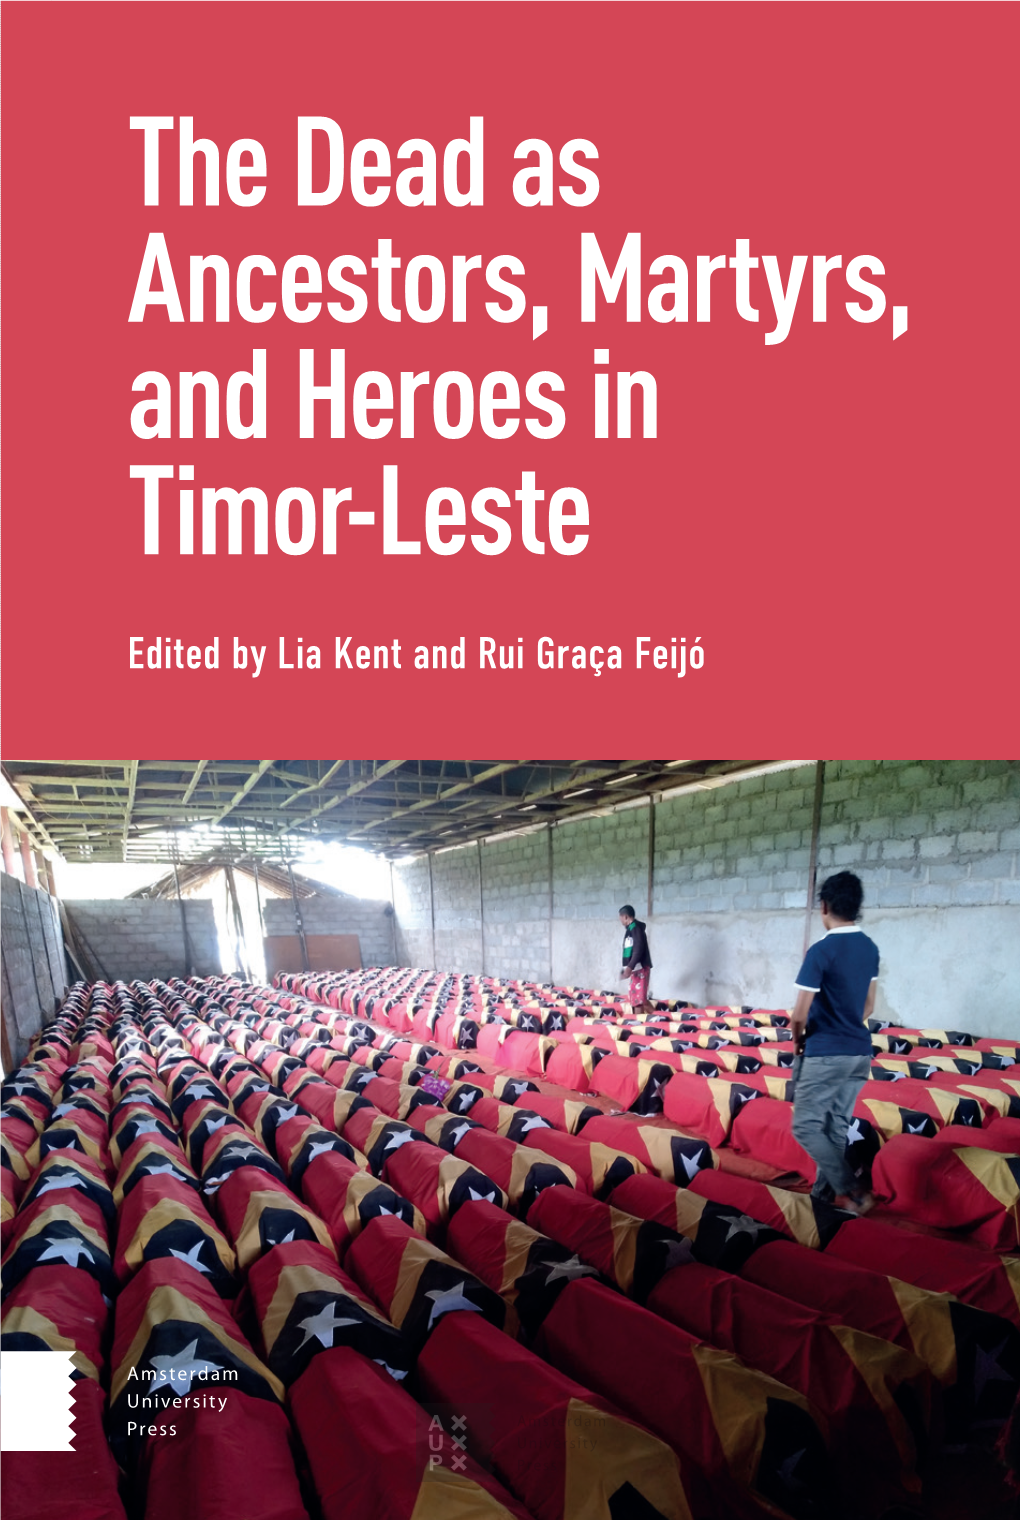 The Dead As Ancestors, Martyrs, and Heroes in Timor-Leste